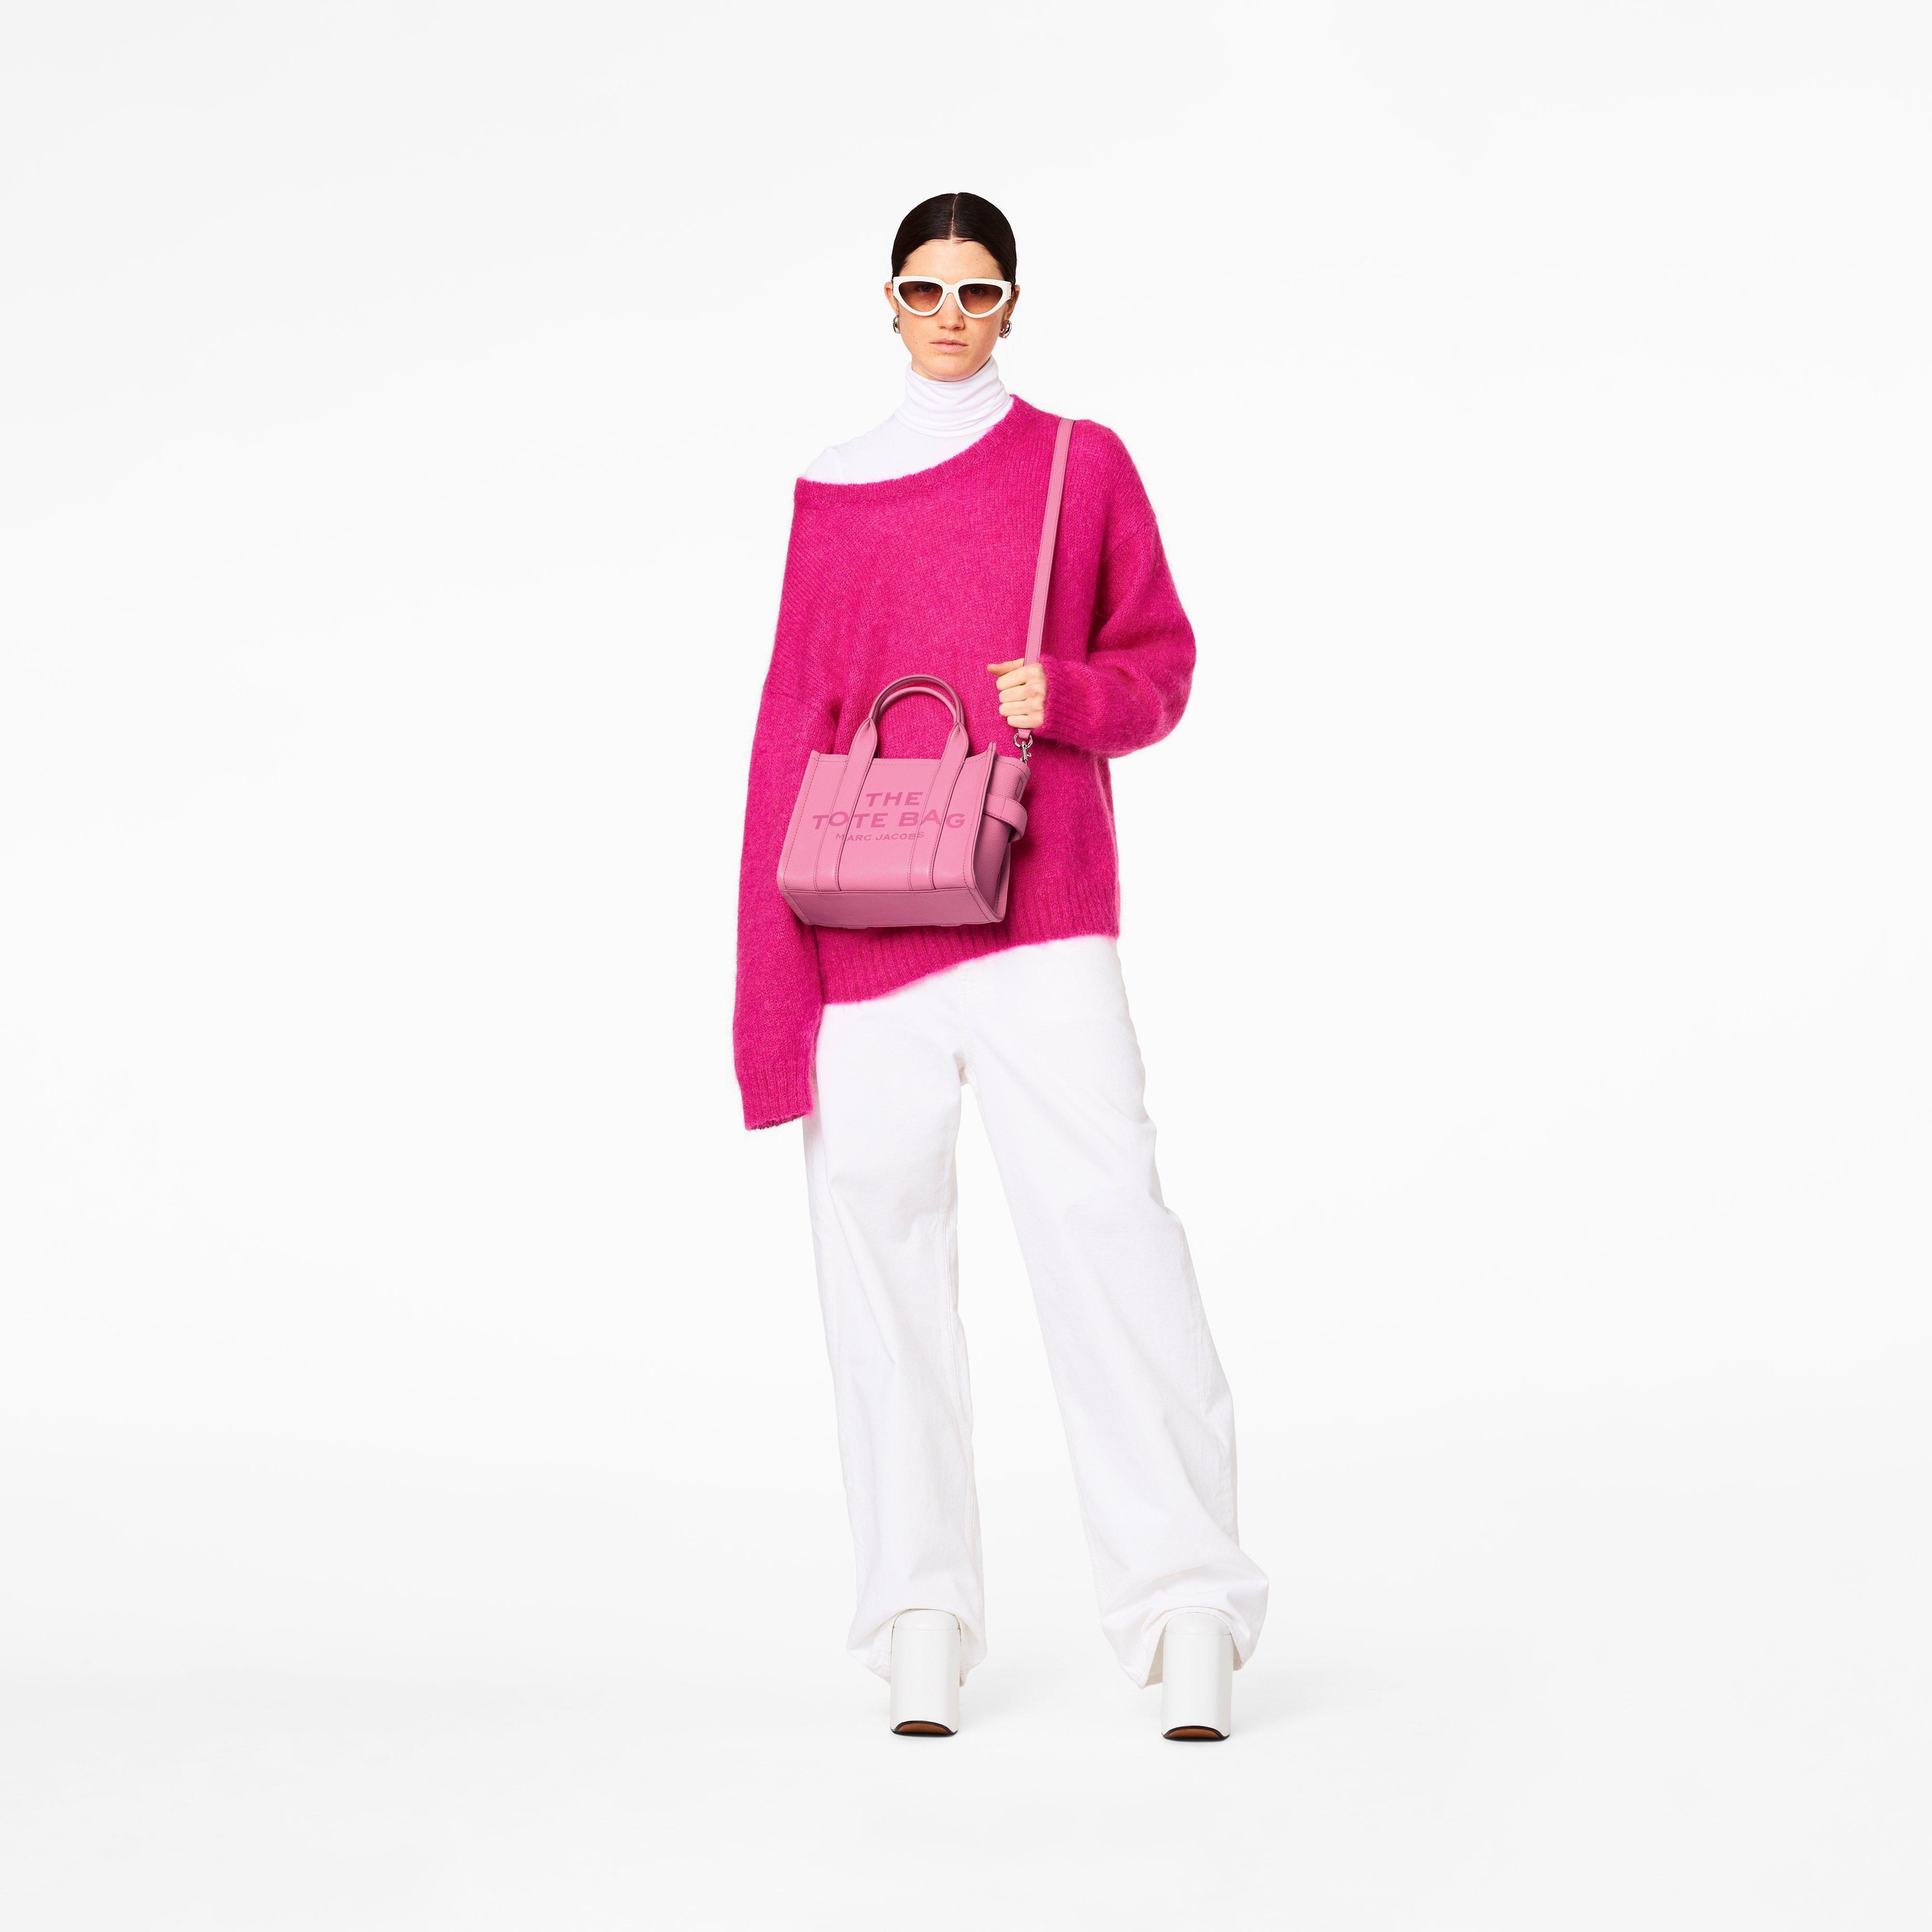 Marc Jacobs The Leather Mini Tote Bag in Pink | Lyst